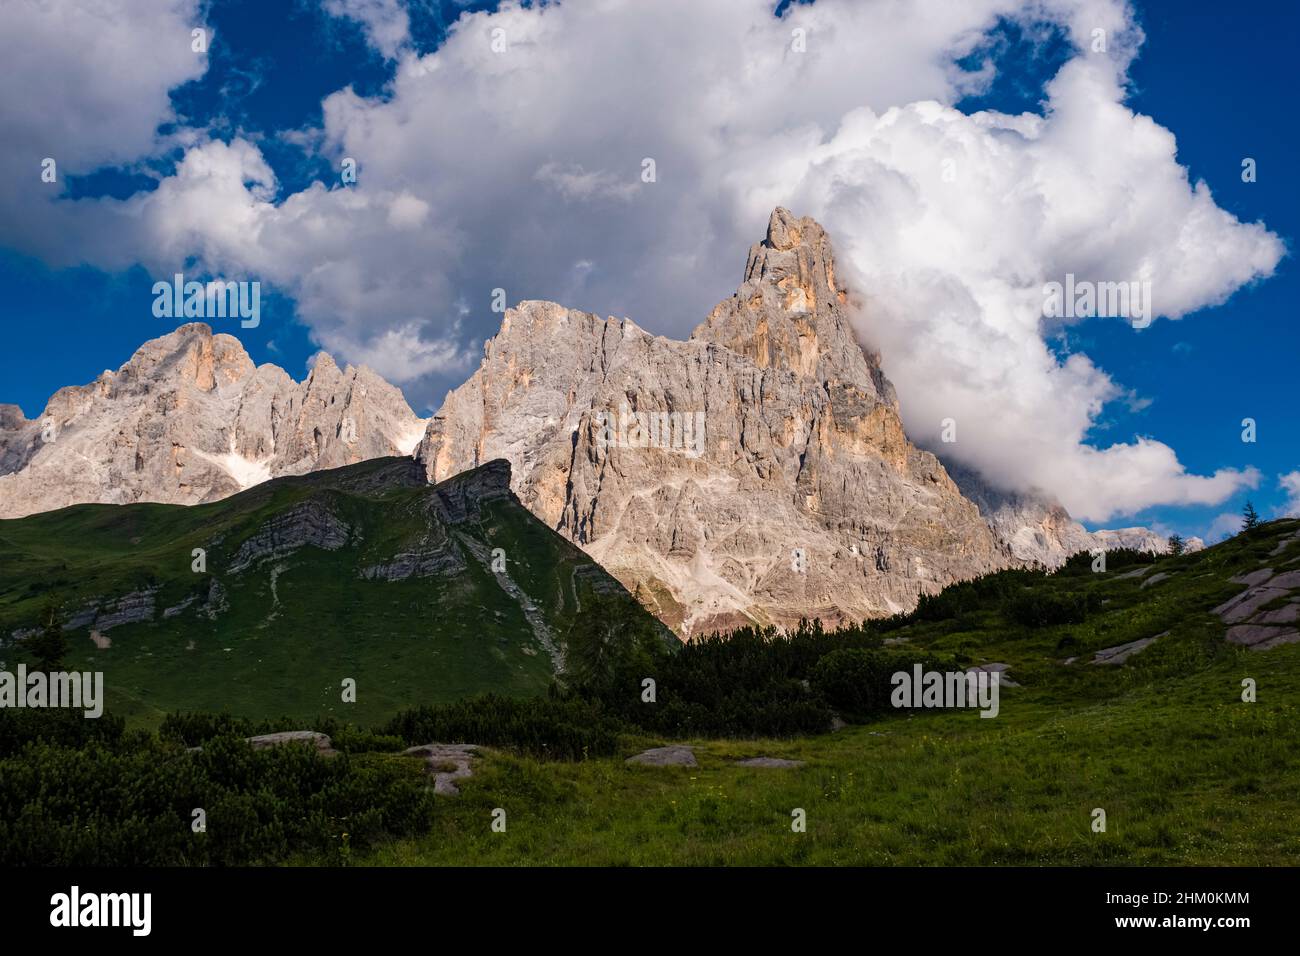 Summit and west face of Cimon della Pala, one of the main summits of the Pala group, seen from Rolle Pass. Stock Photo